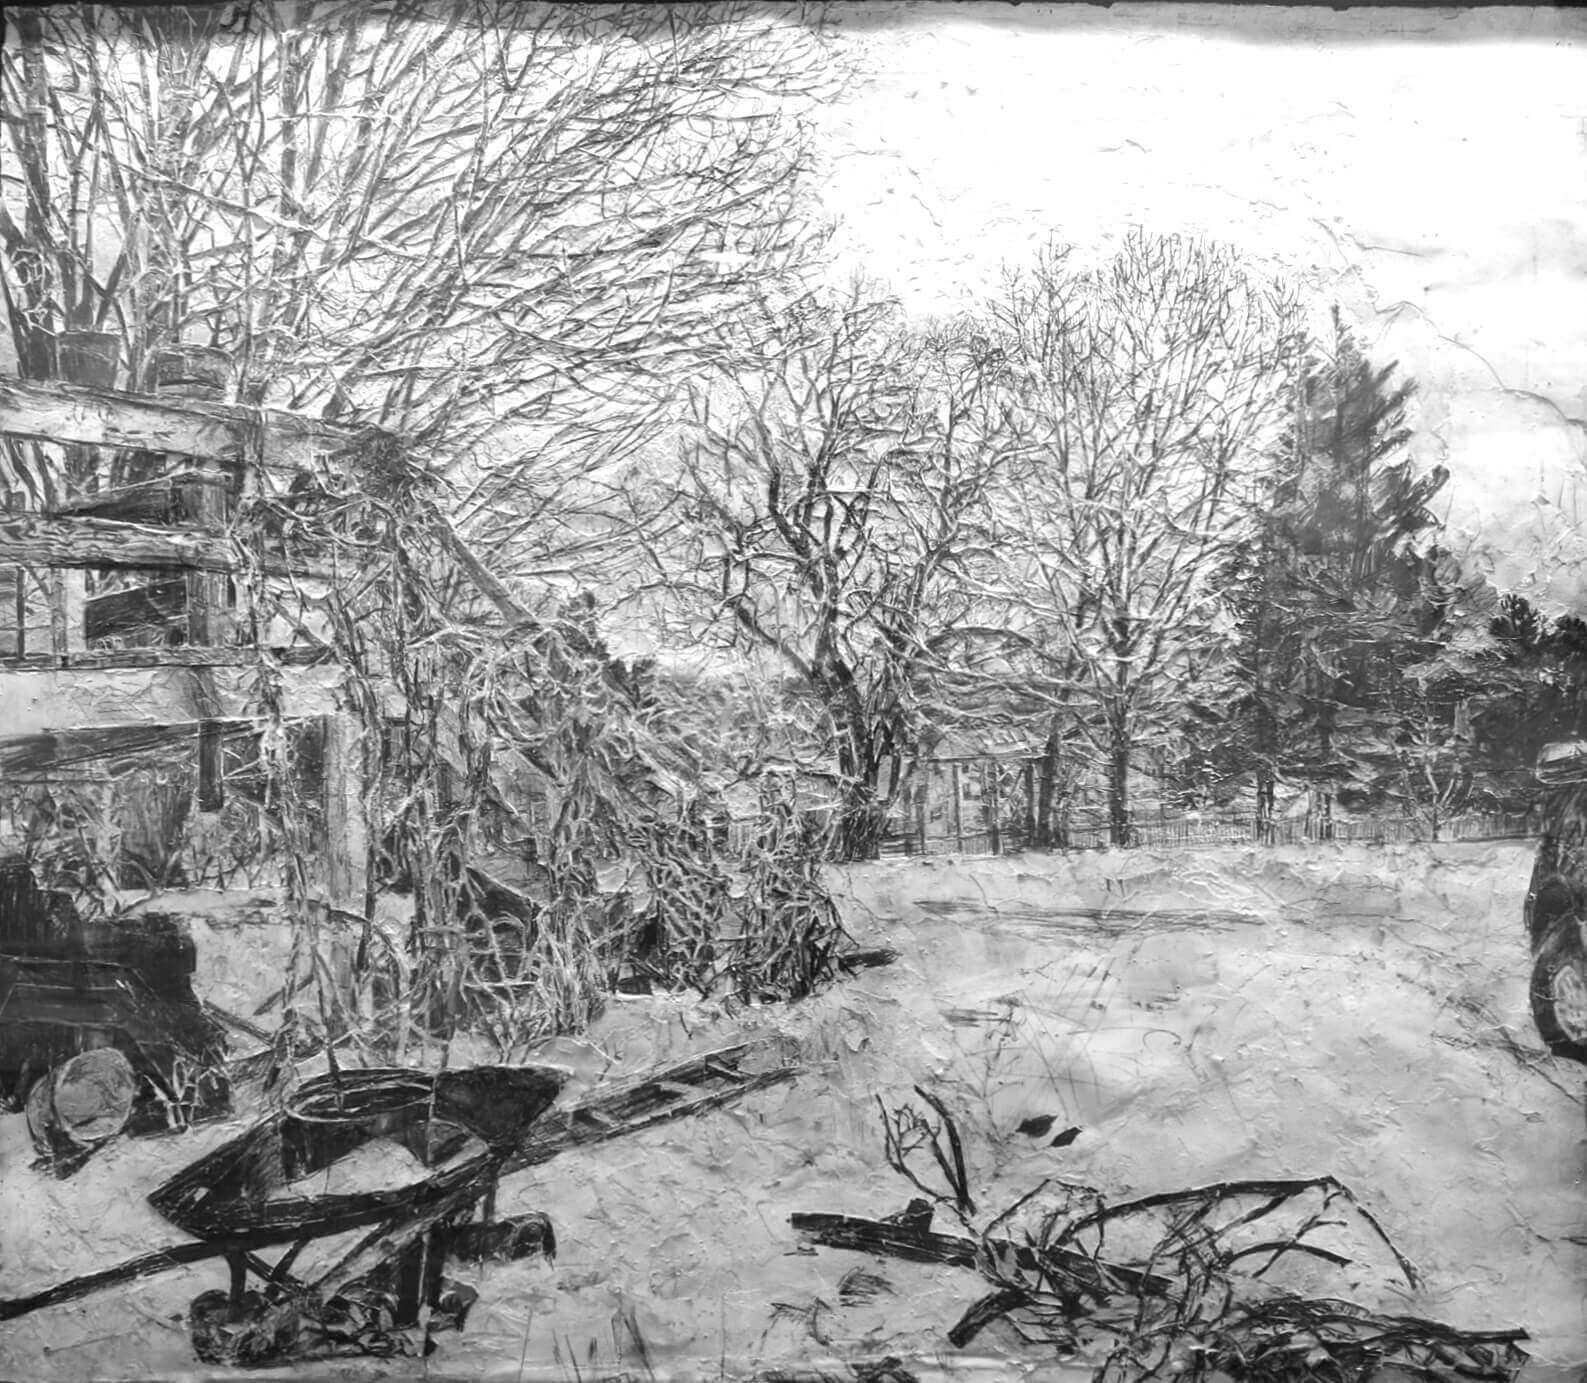 Stanley Lewis, View from Studio Window, 2003-4, graphite on paper, approx. 45 x 51 inches (From the Louis-Dreyfus Family Collection, courtesy of The William Louis-Dreyfus Foundation Inc.)